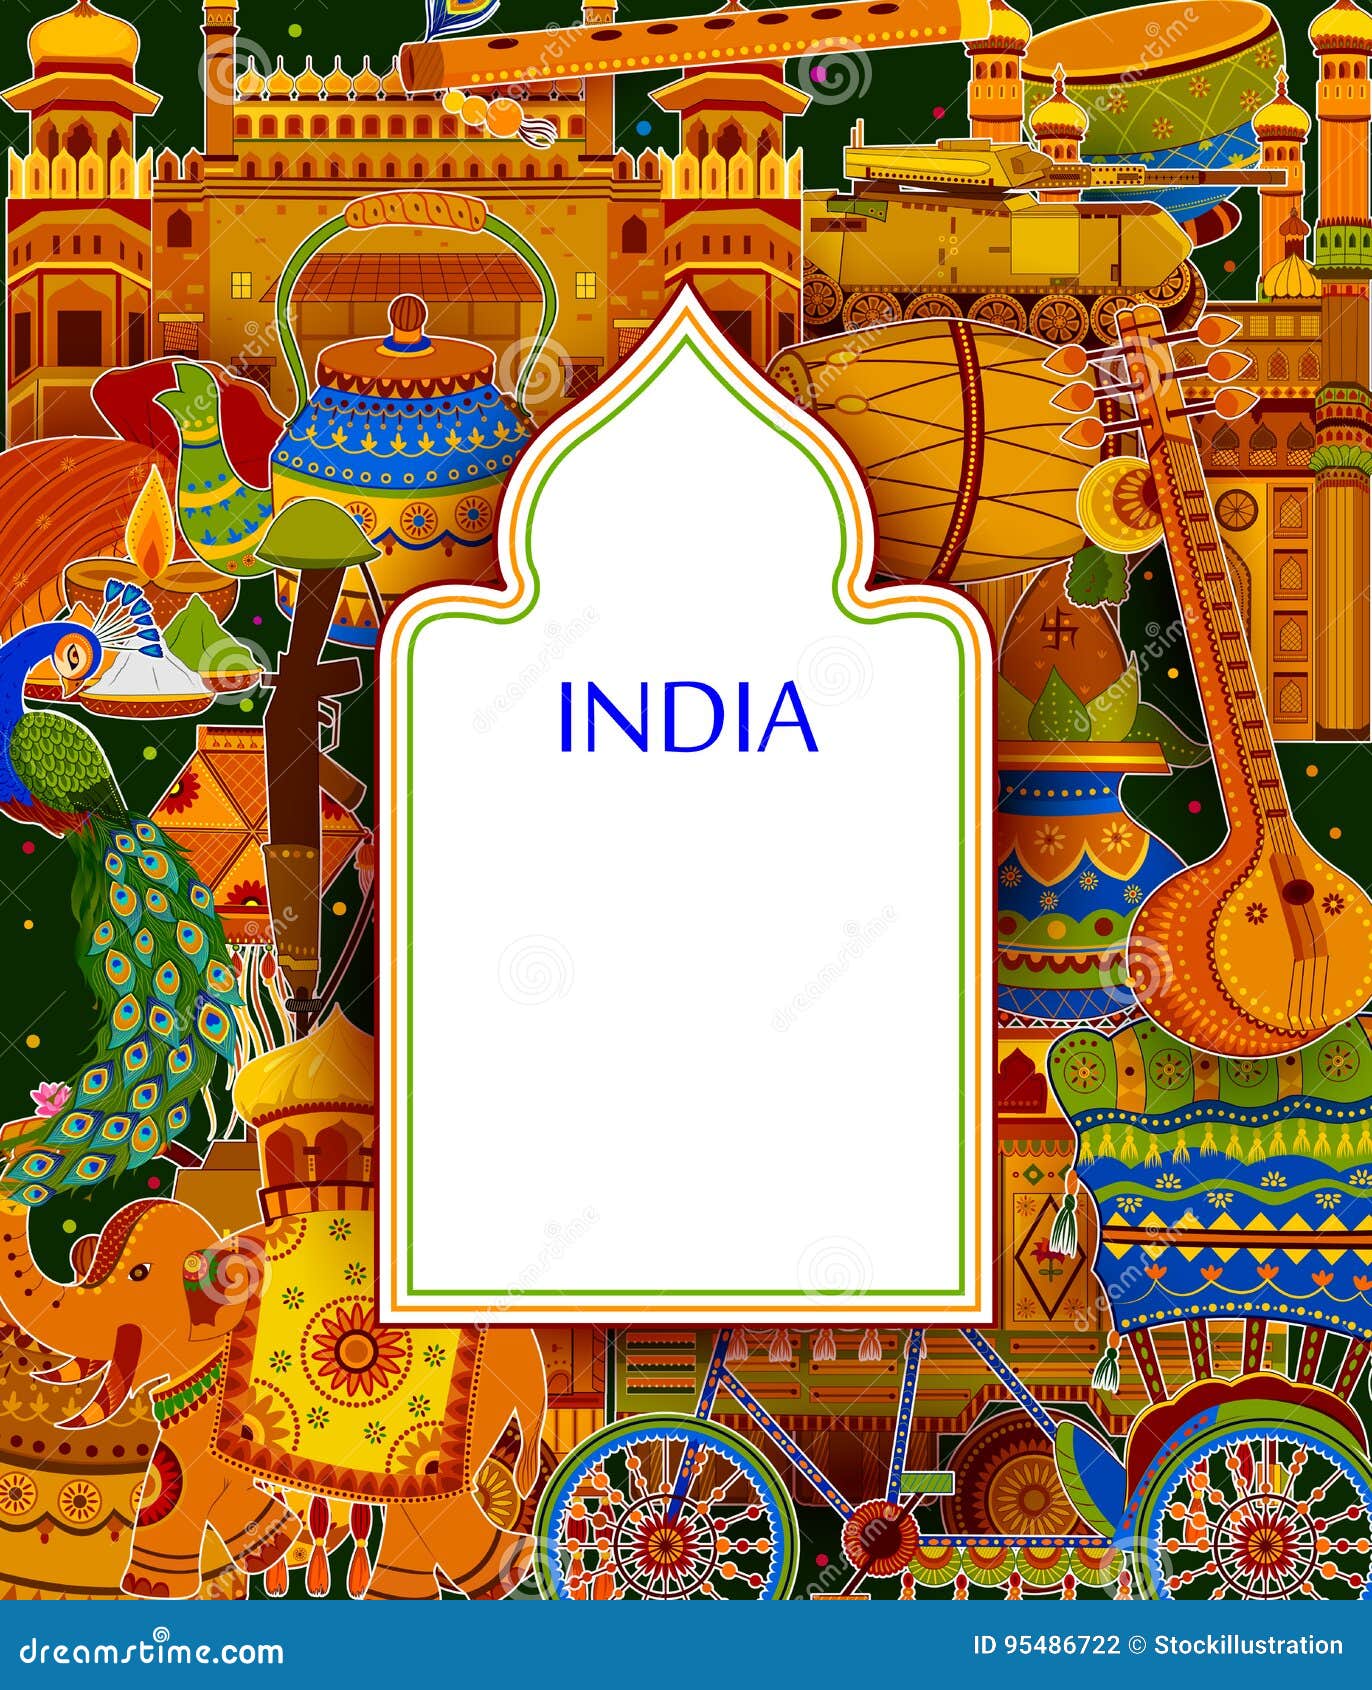 Incredible India Background Depicting Indian Colorful Culture and Religion  Stock Illustration - Illustration of country, monument: 95486722